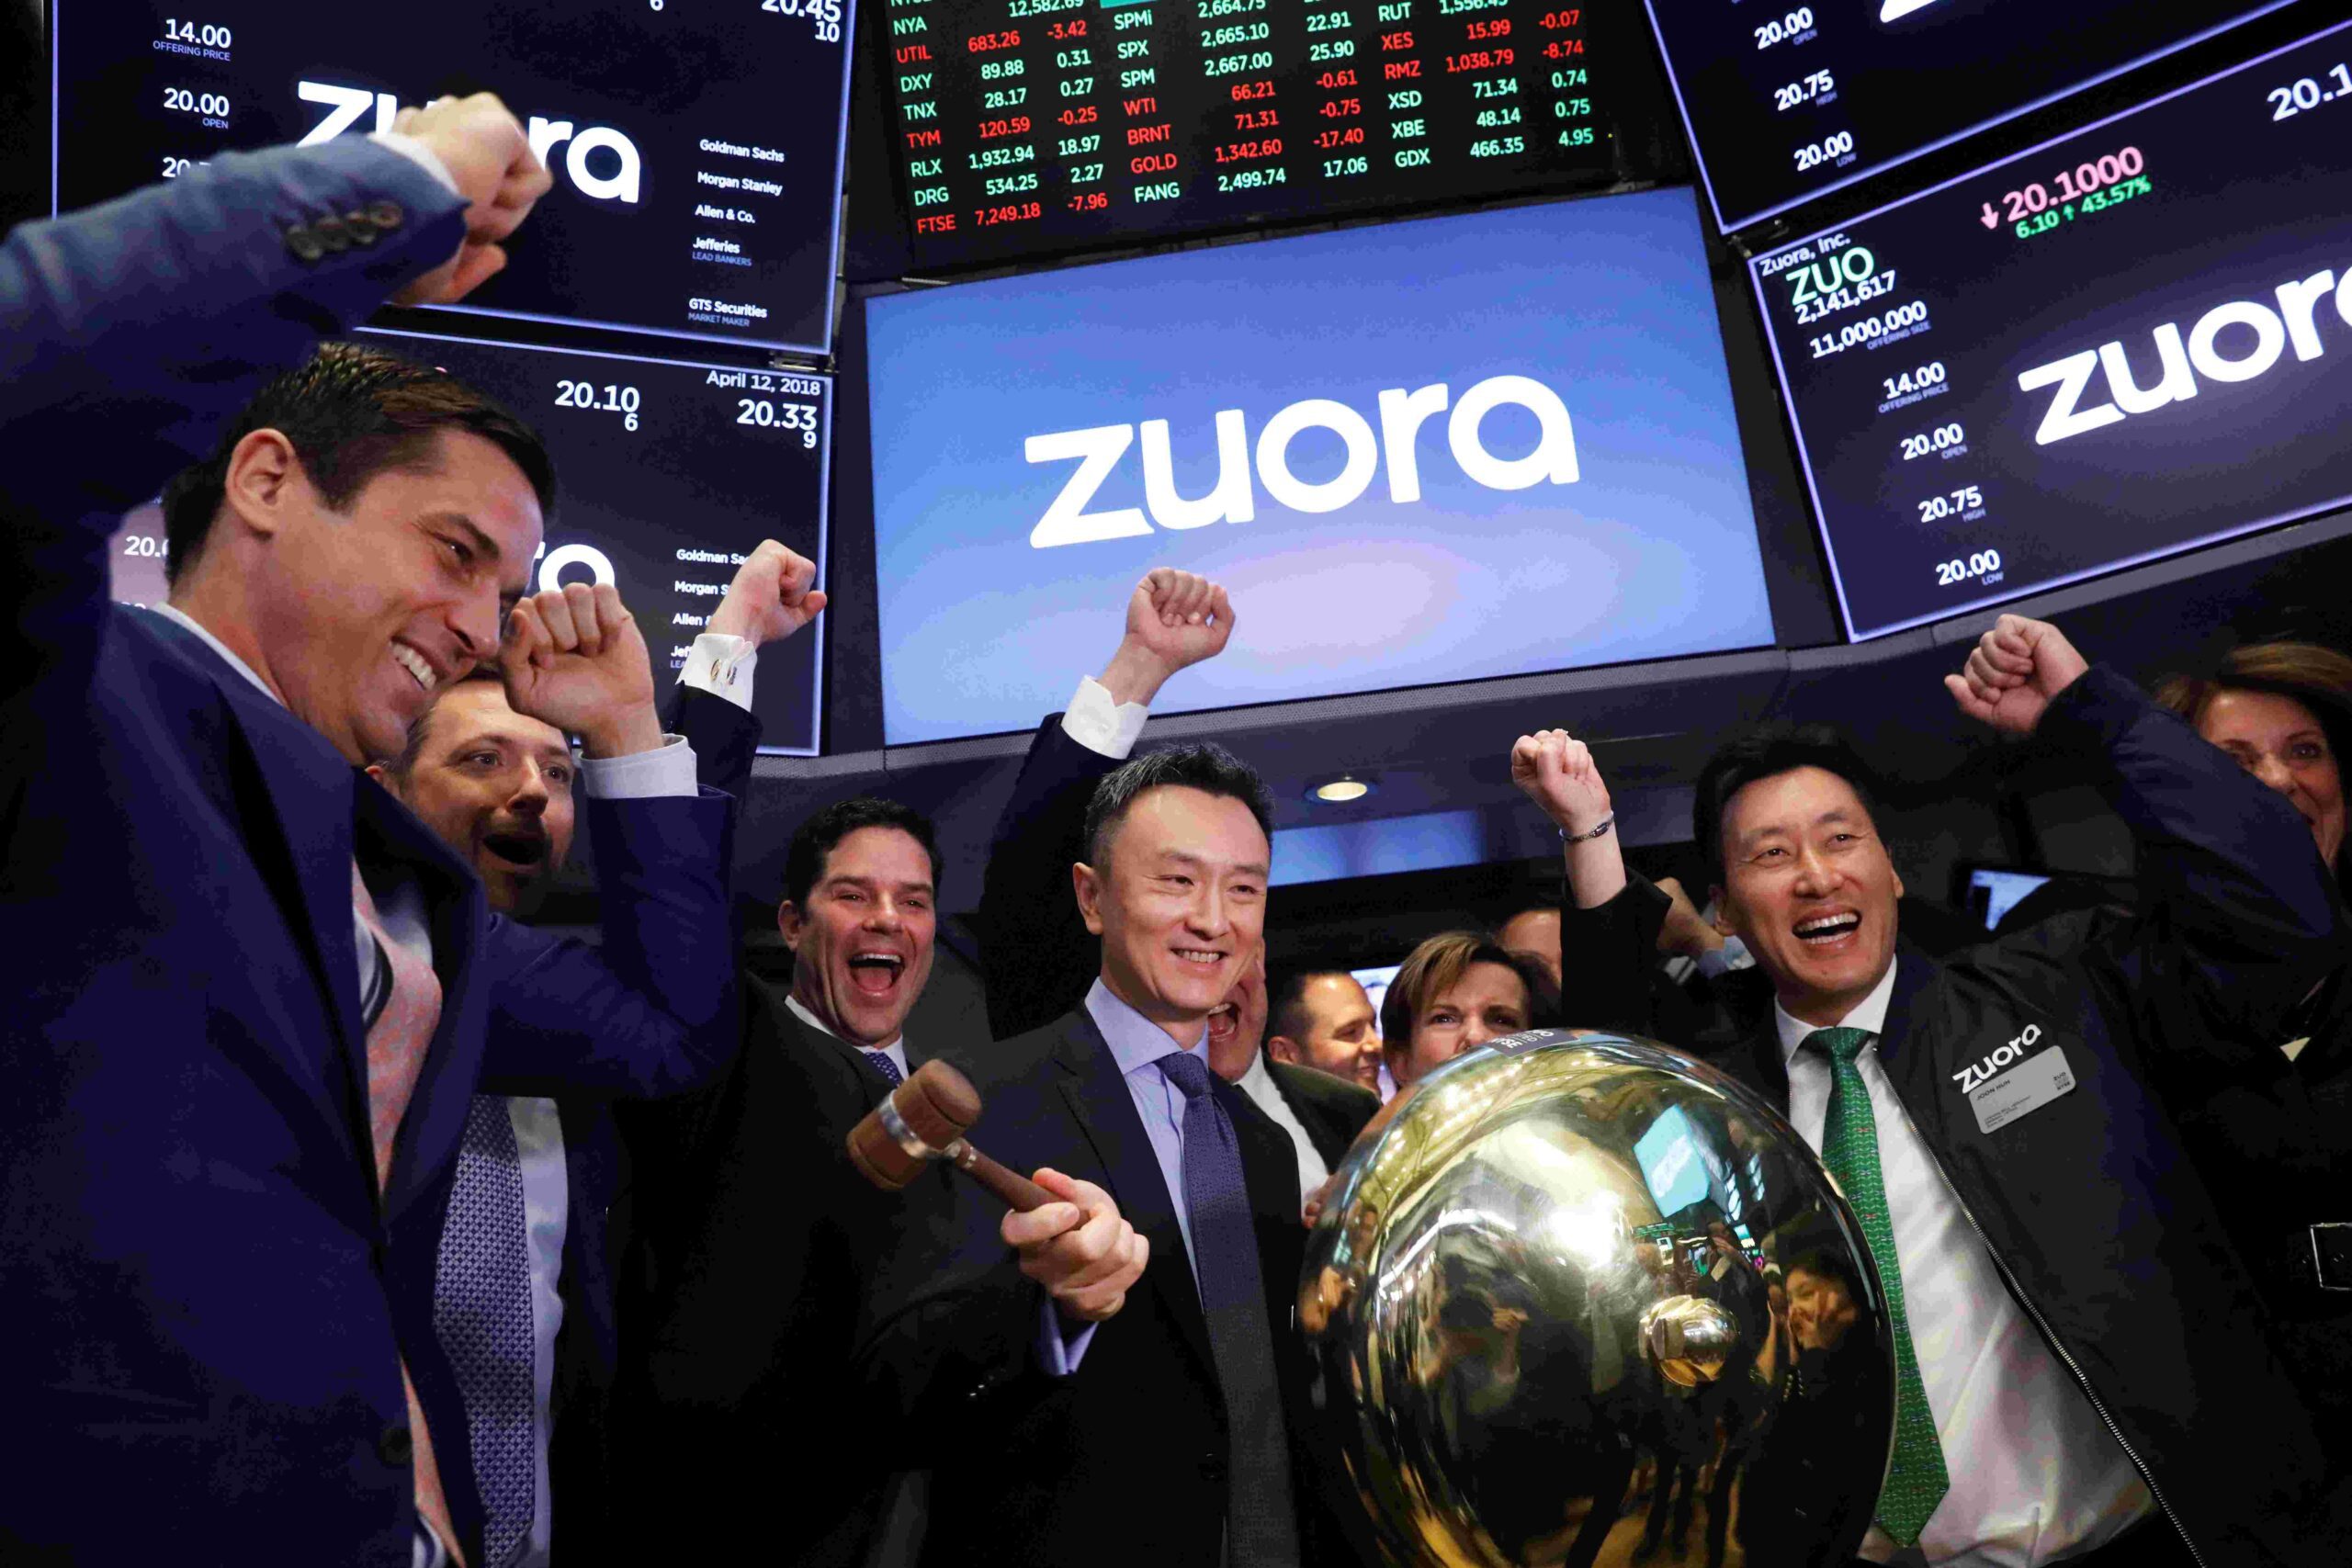 Billing software firm Zuora explores sale after takeover interest